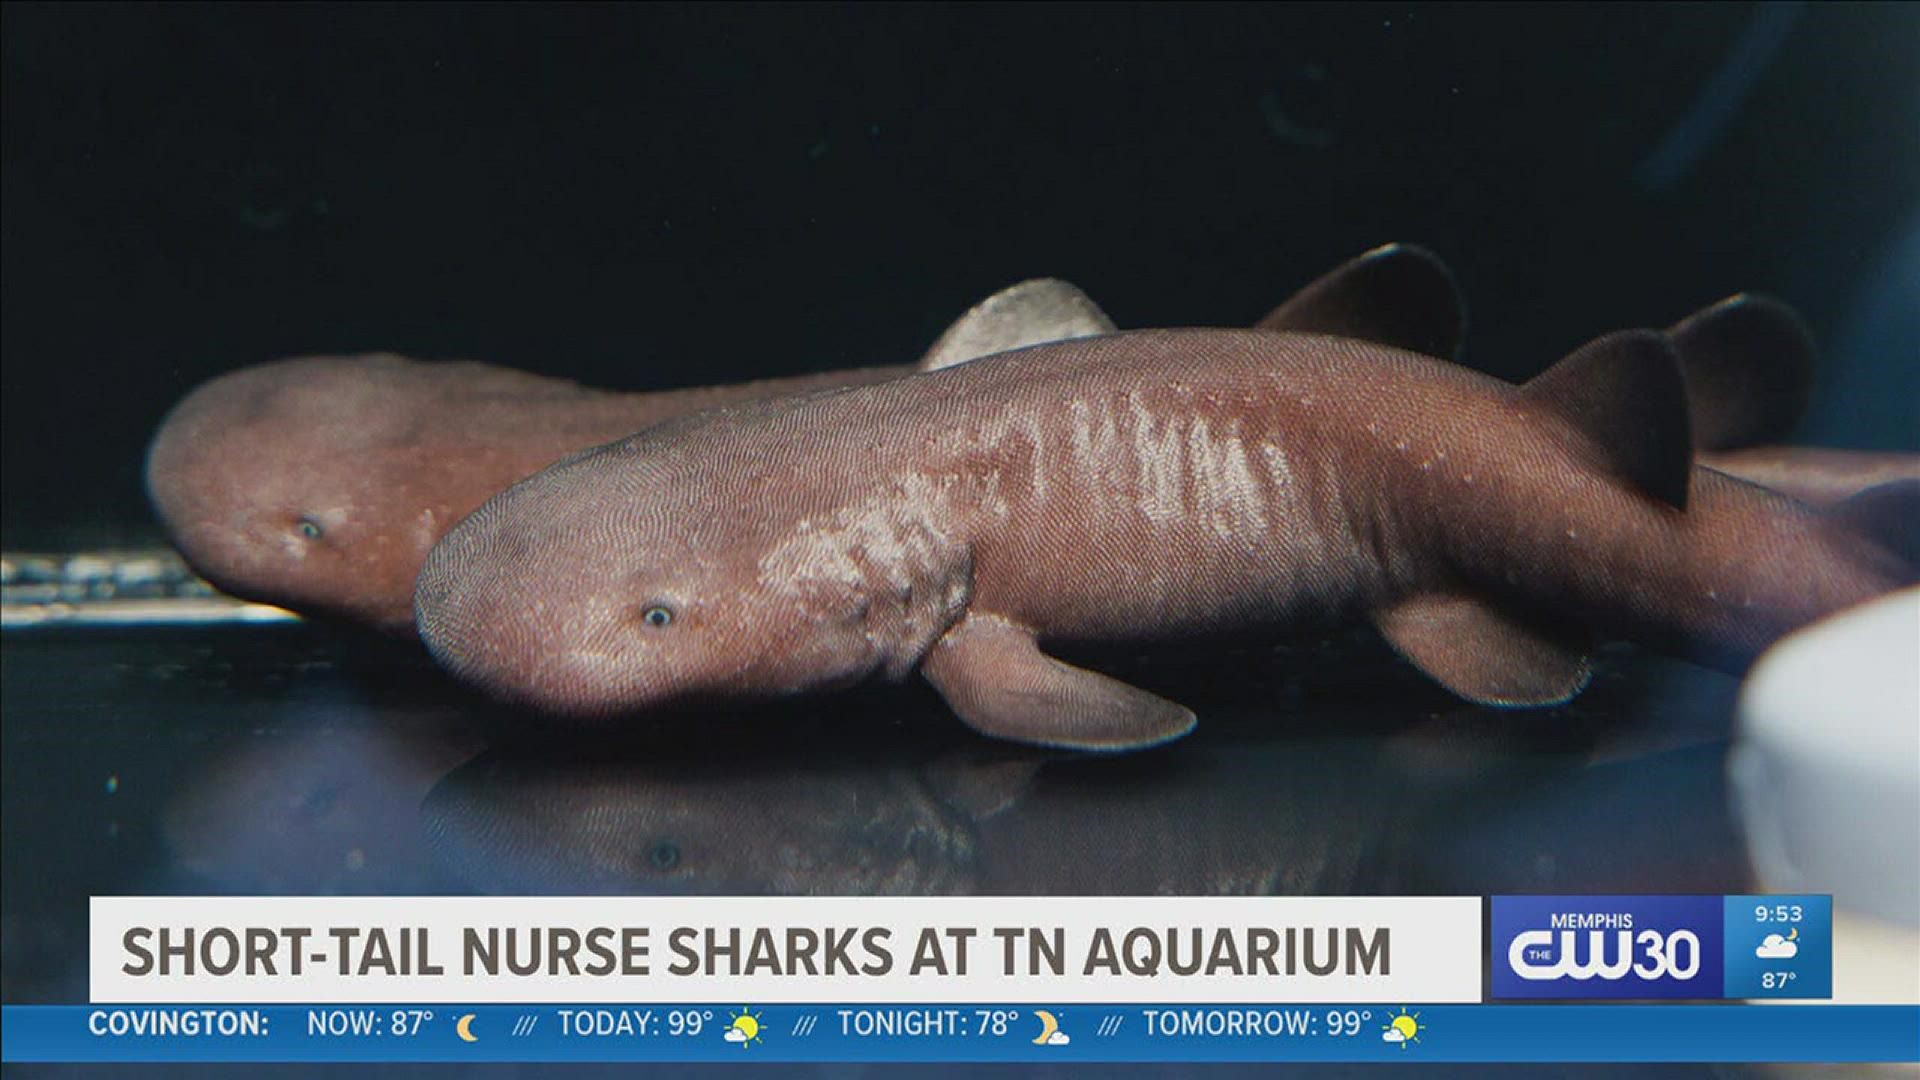 Few facilities have populations of short-tail nurse sharks, and the Tennessee Aquarium currently has 20.